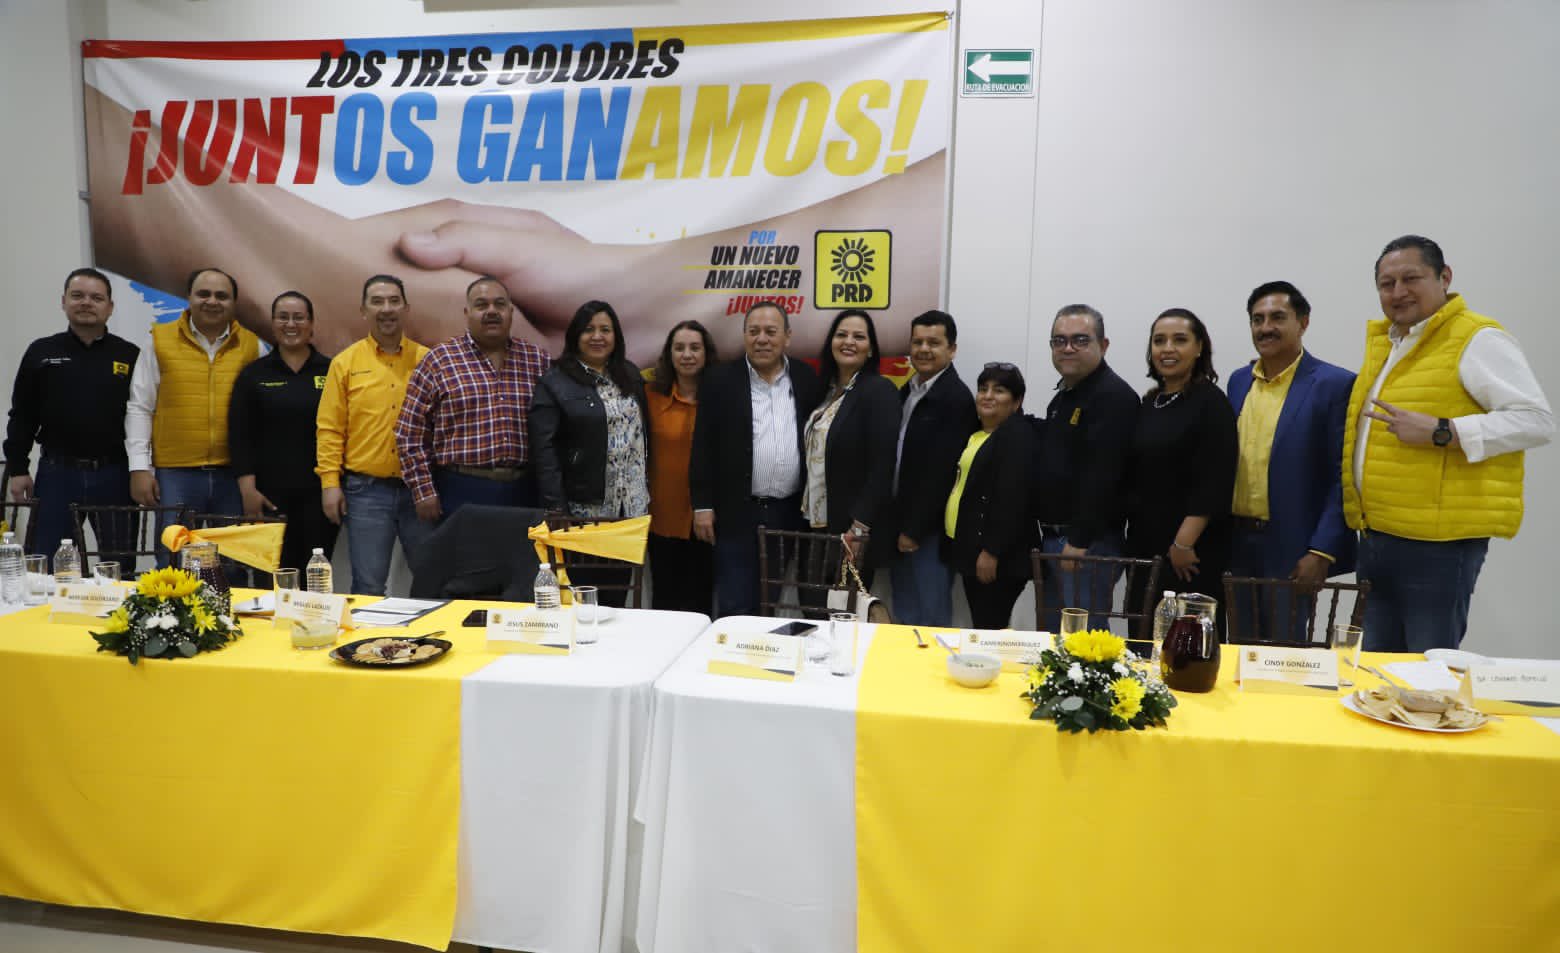 Jesús Zambrano insisted on respect among members (PRD)